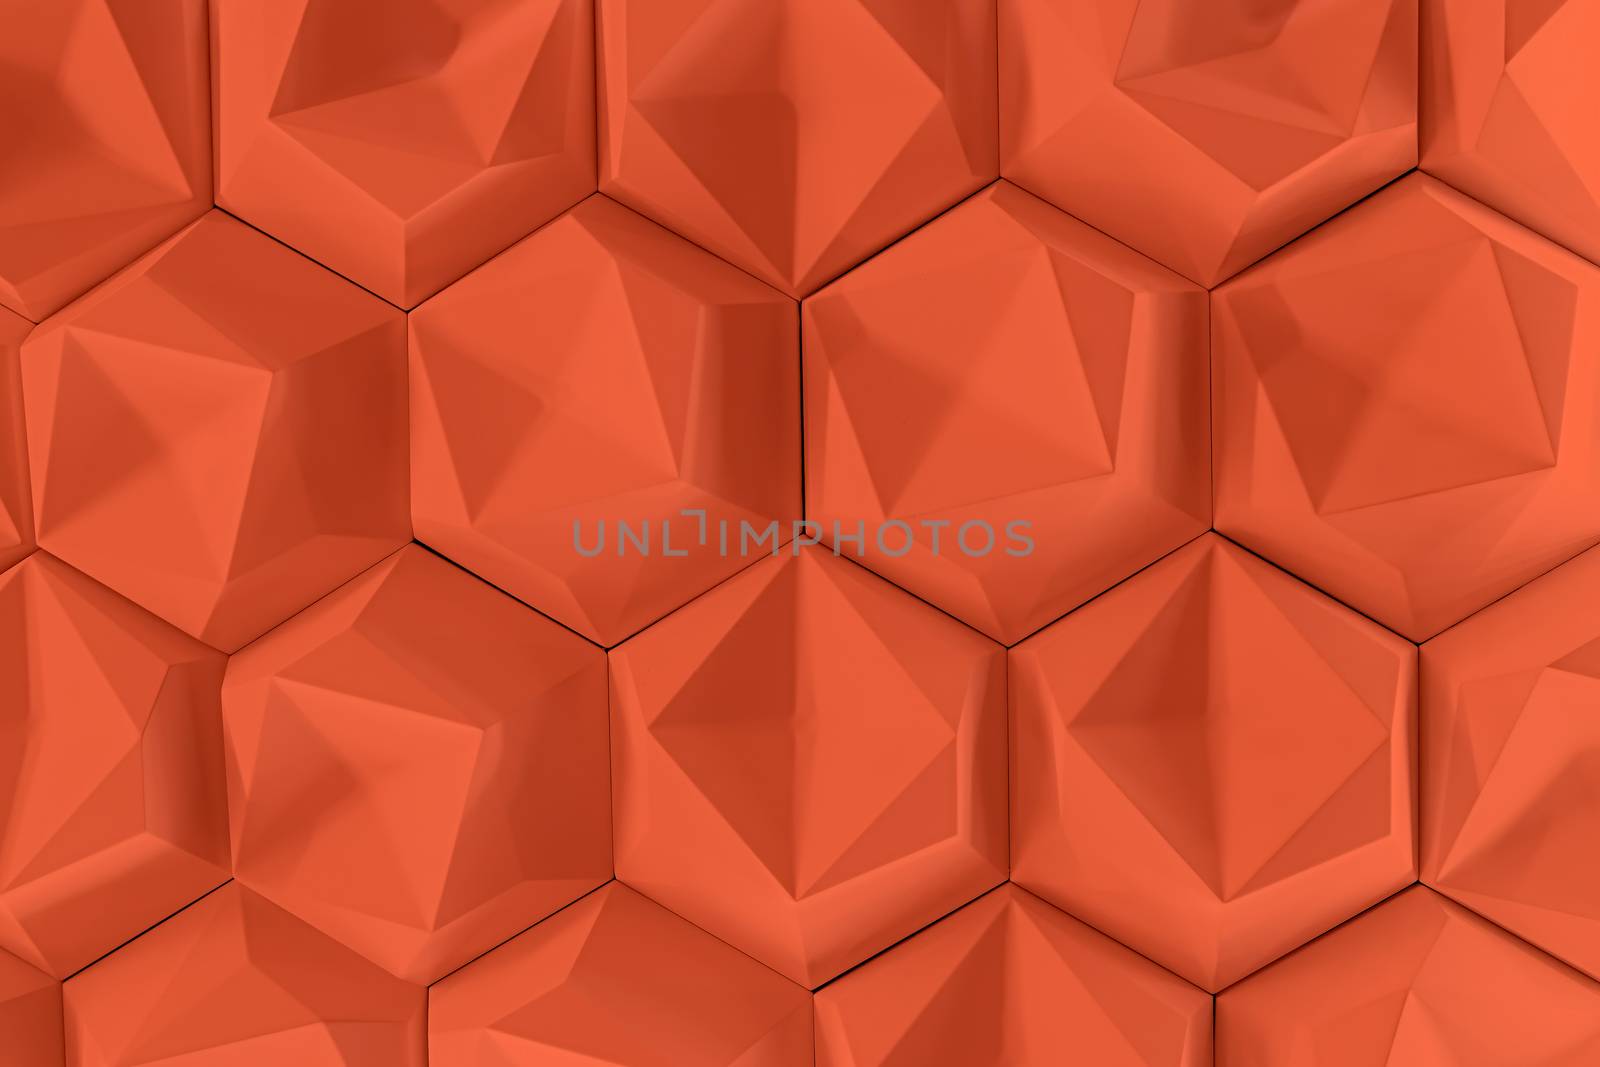 3D decorative wall for the interior of an unusual hexagonal geometric shape, similar to a honeycomb. Abstract texture of saturated orange red